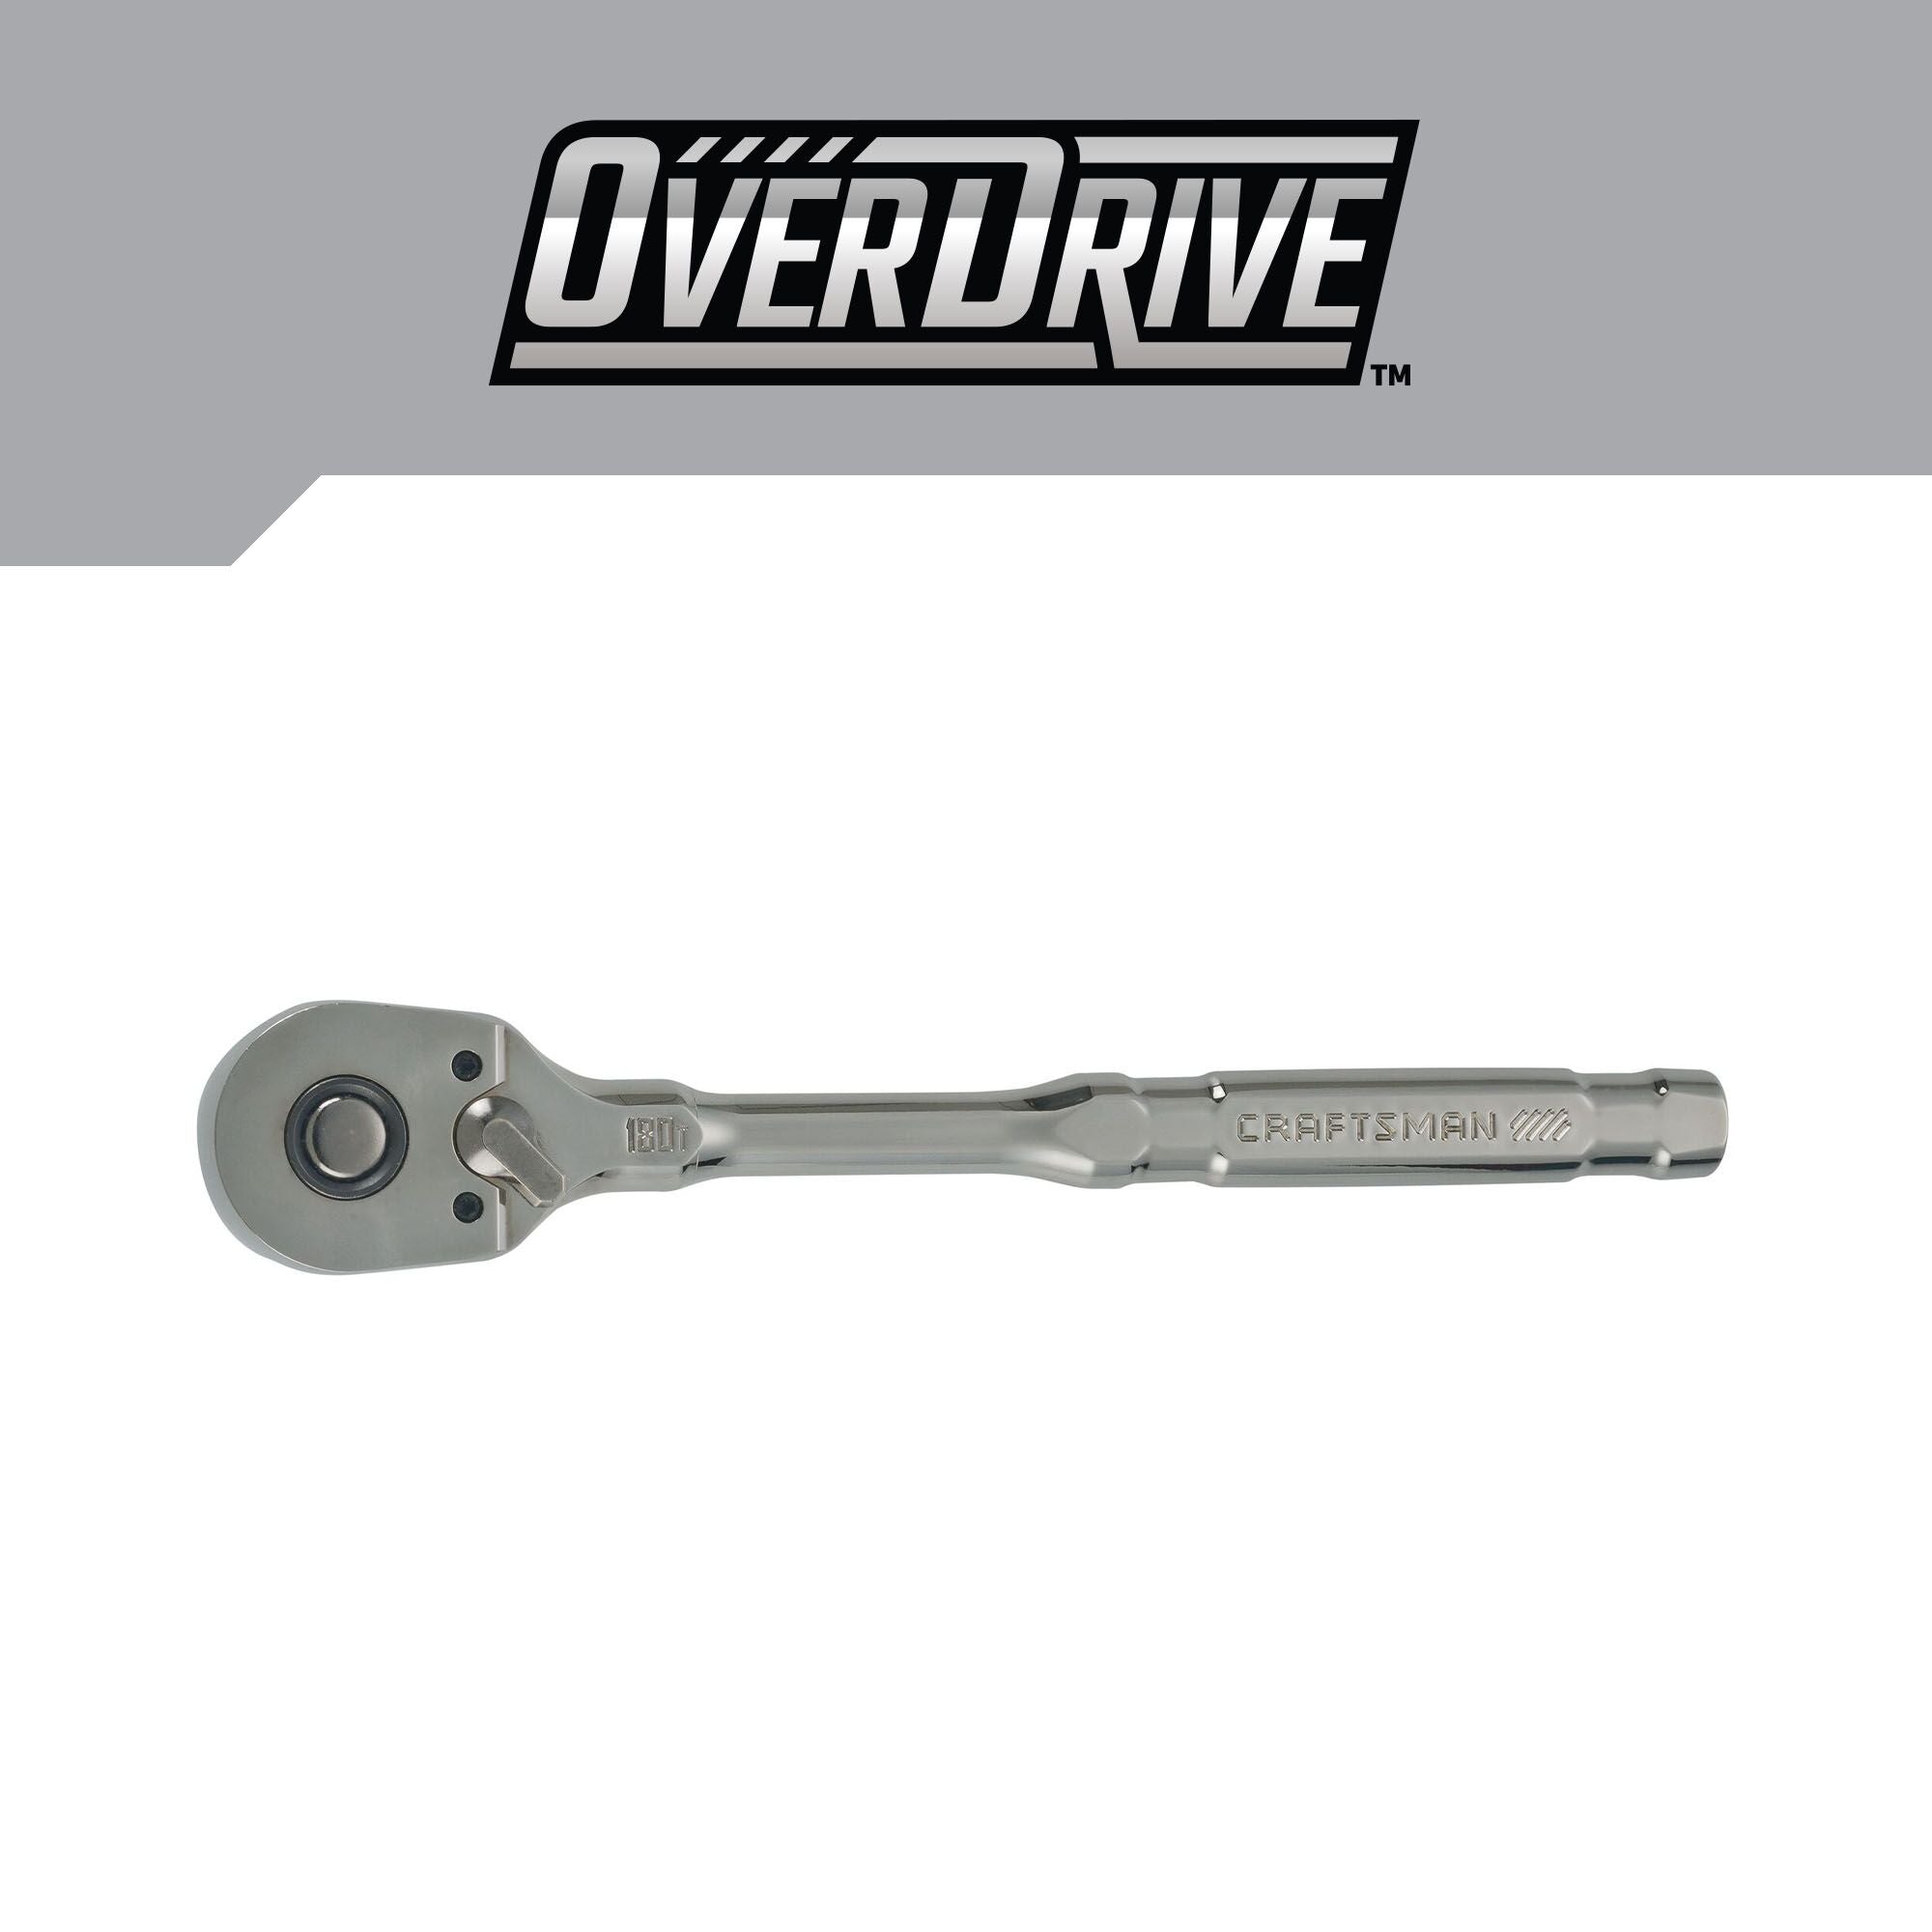 CRAFTSMAN OVERDRIVE 1/2 INCH DRIVE RATCHET on white background